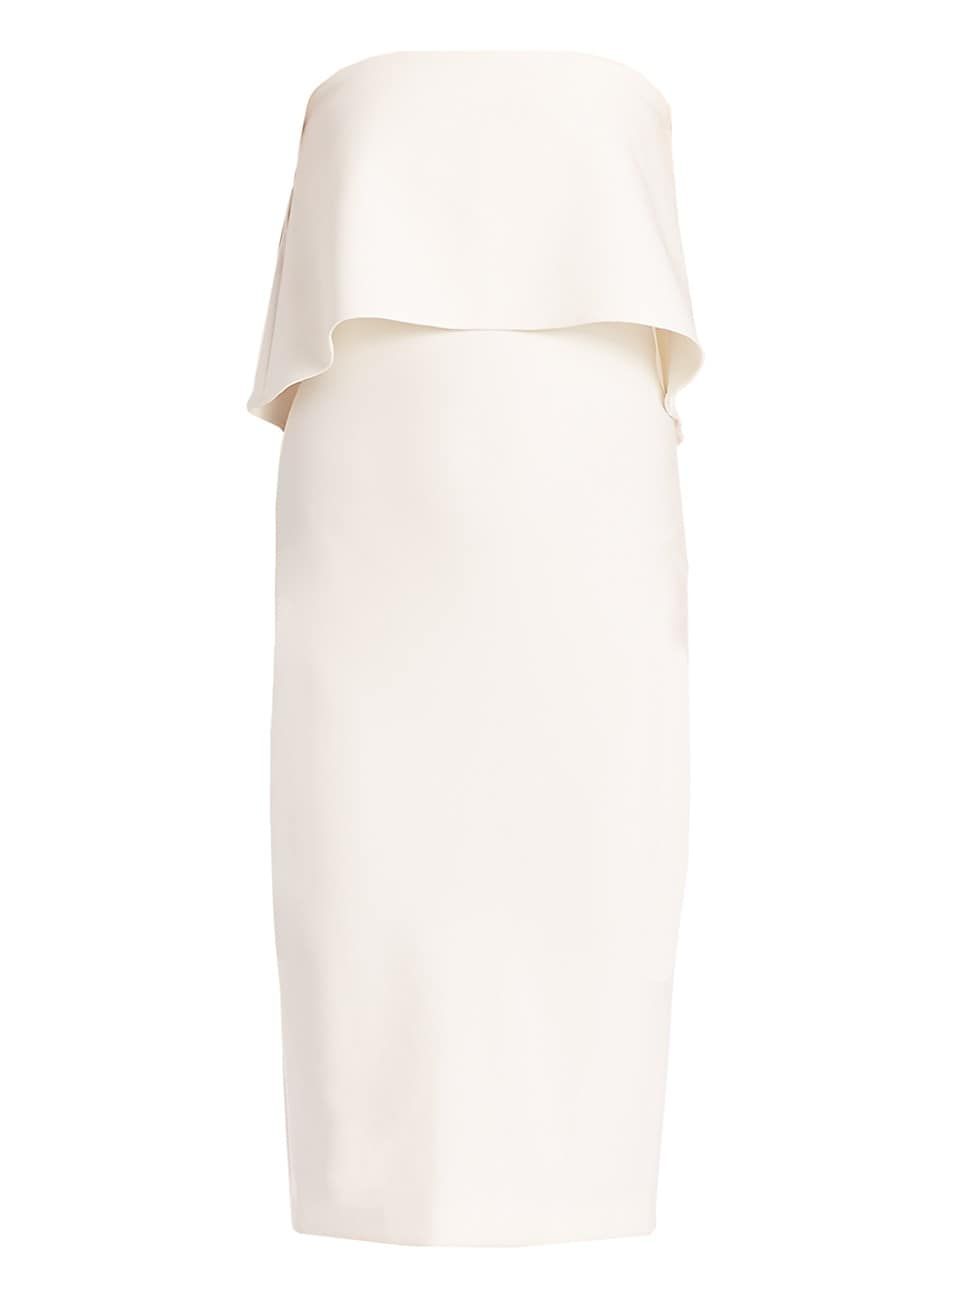 LIKELY Driggs Strapless Dress | Saks Fifth Avenue